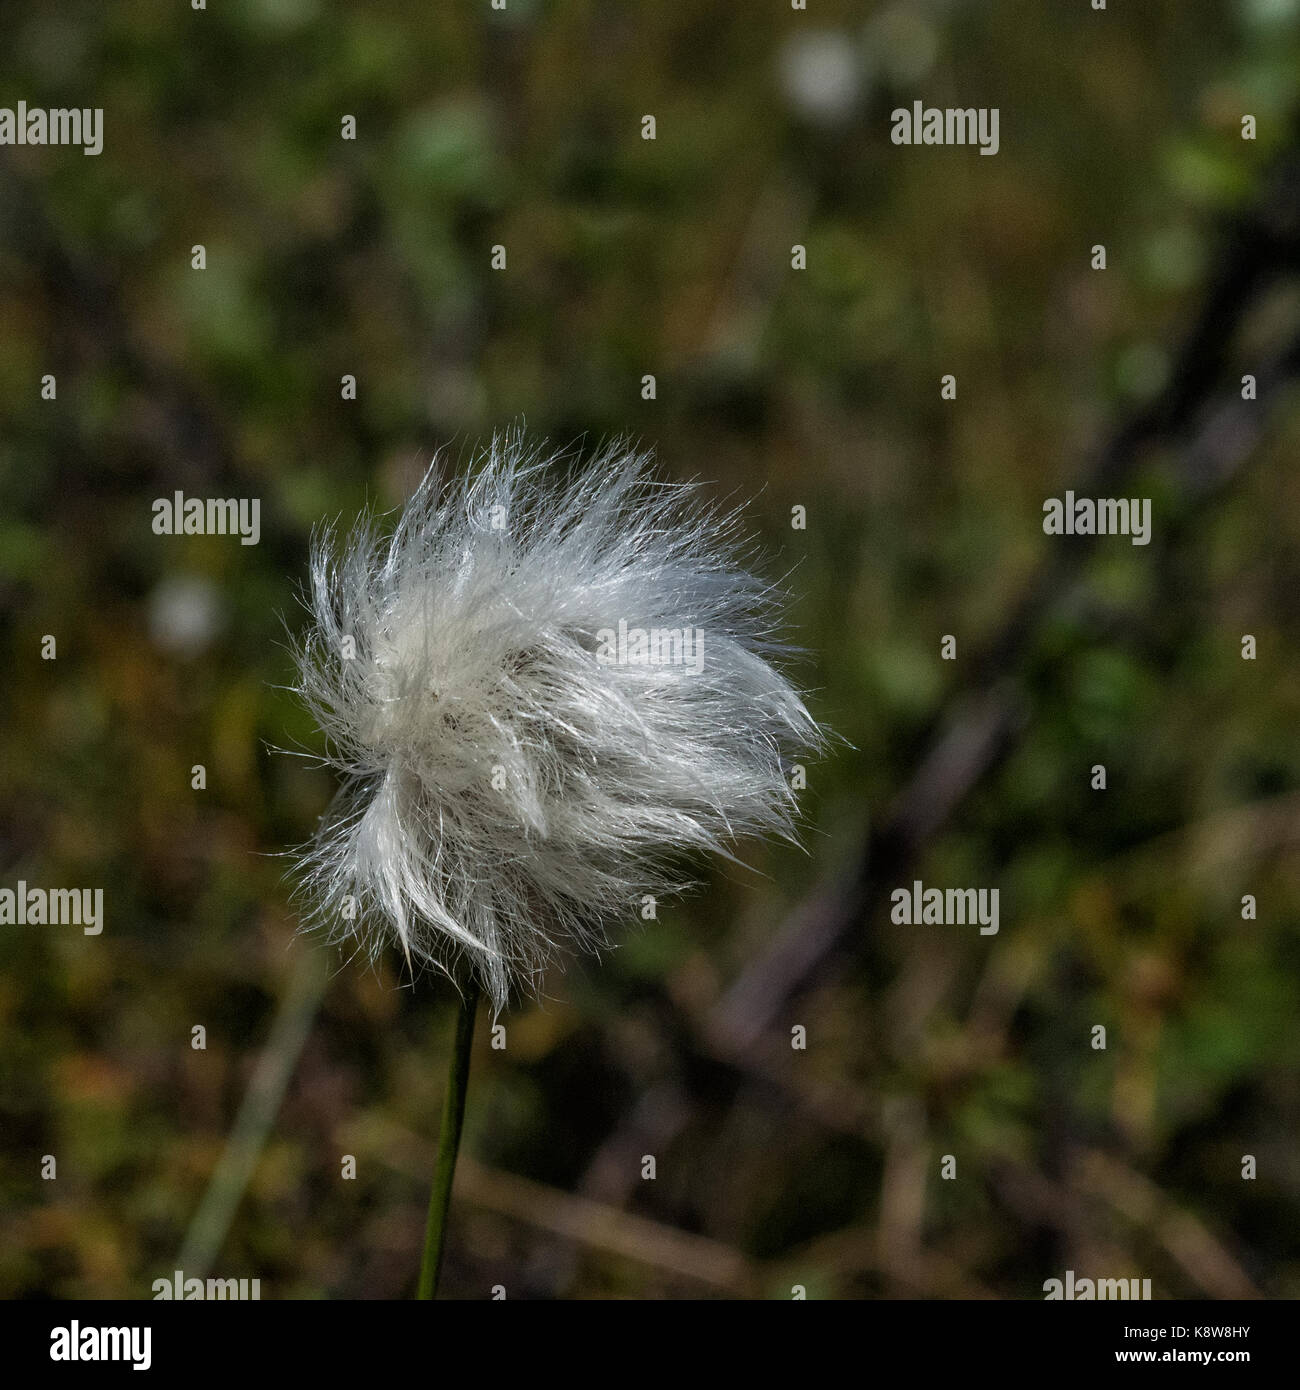 Reacting to a slight wind, the tuffs of an Alaskan cotton flower wave about. Stock Photo